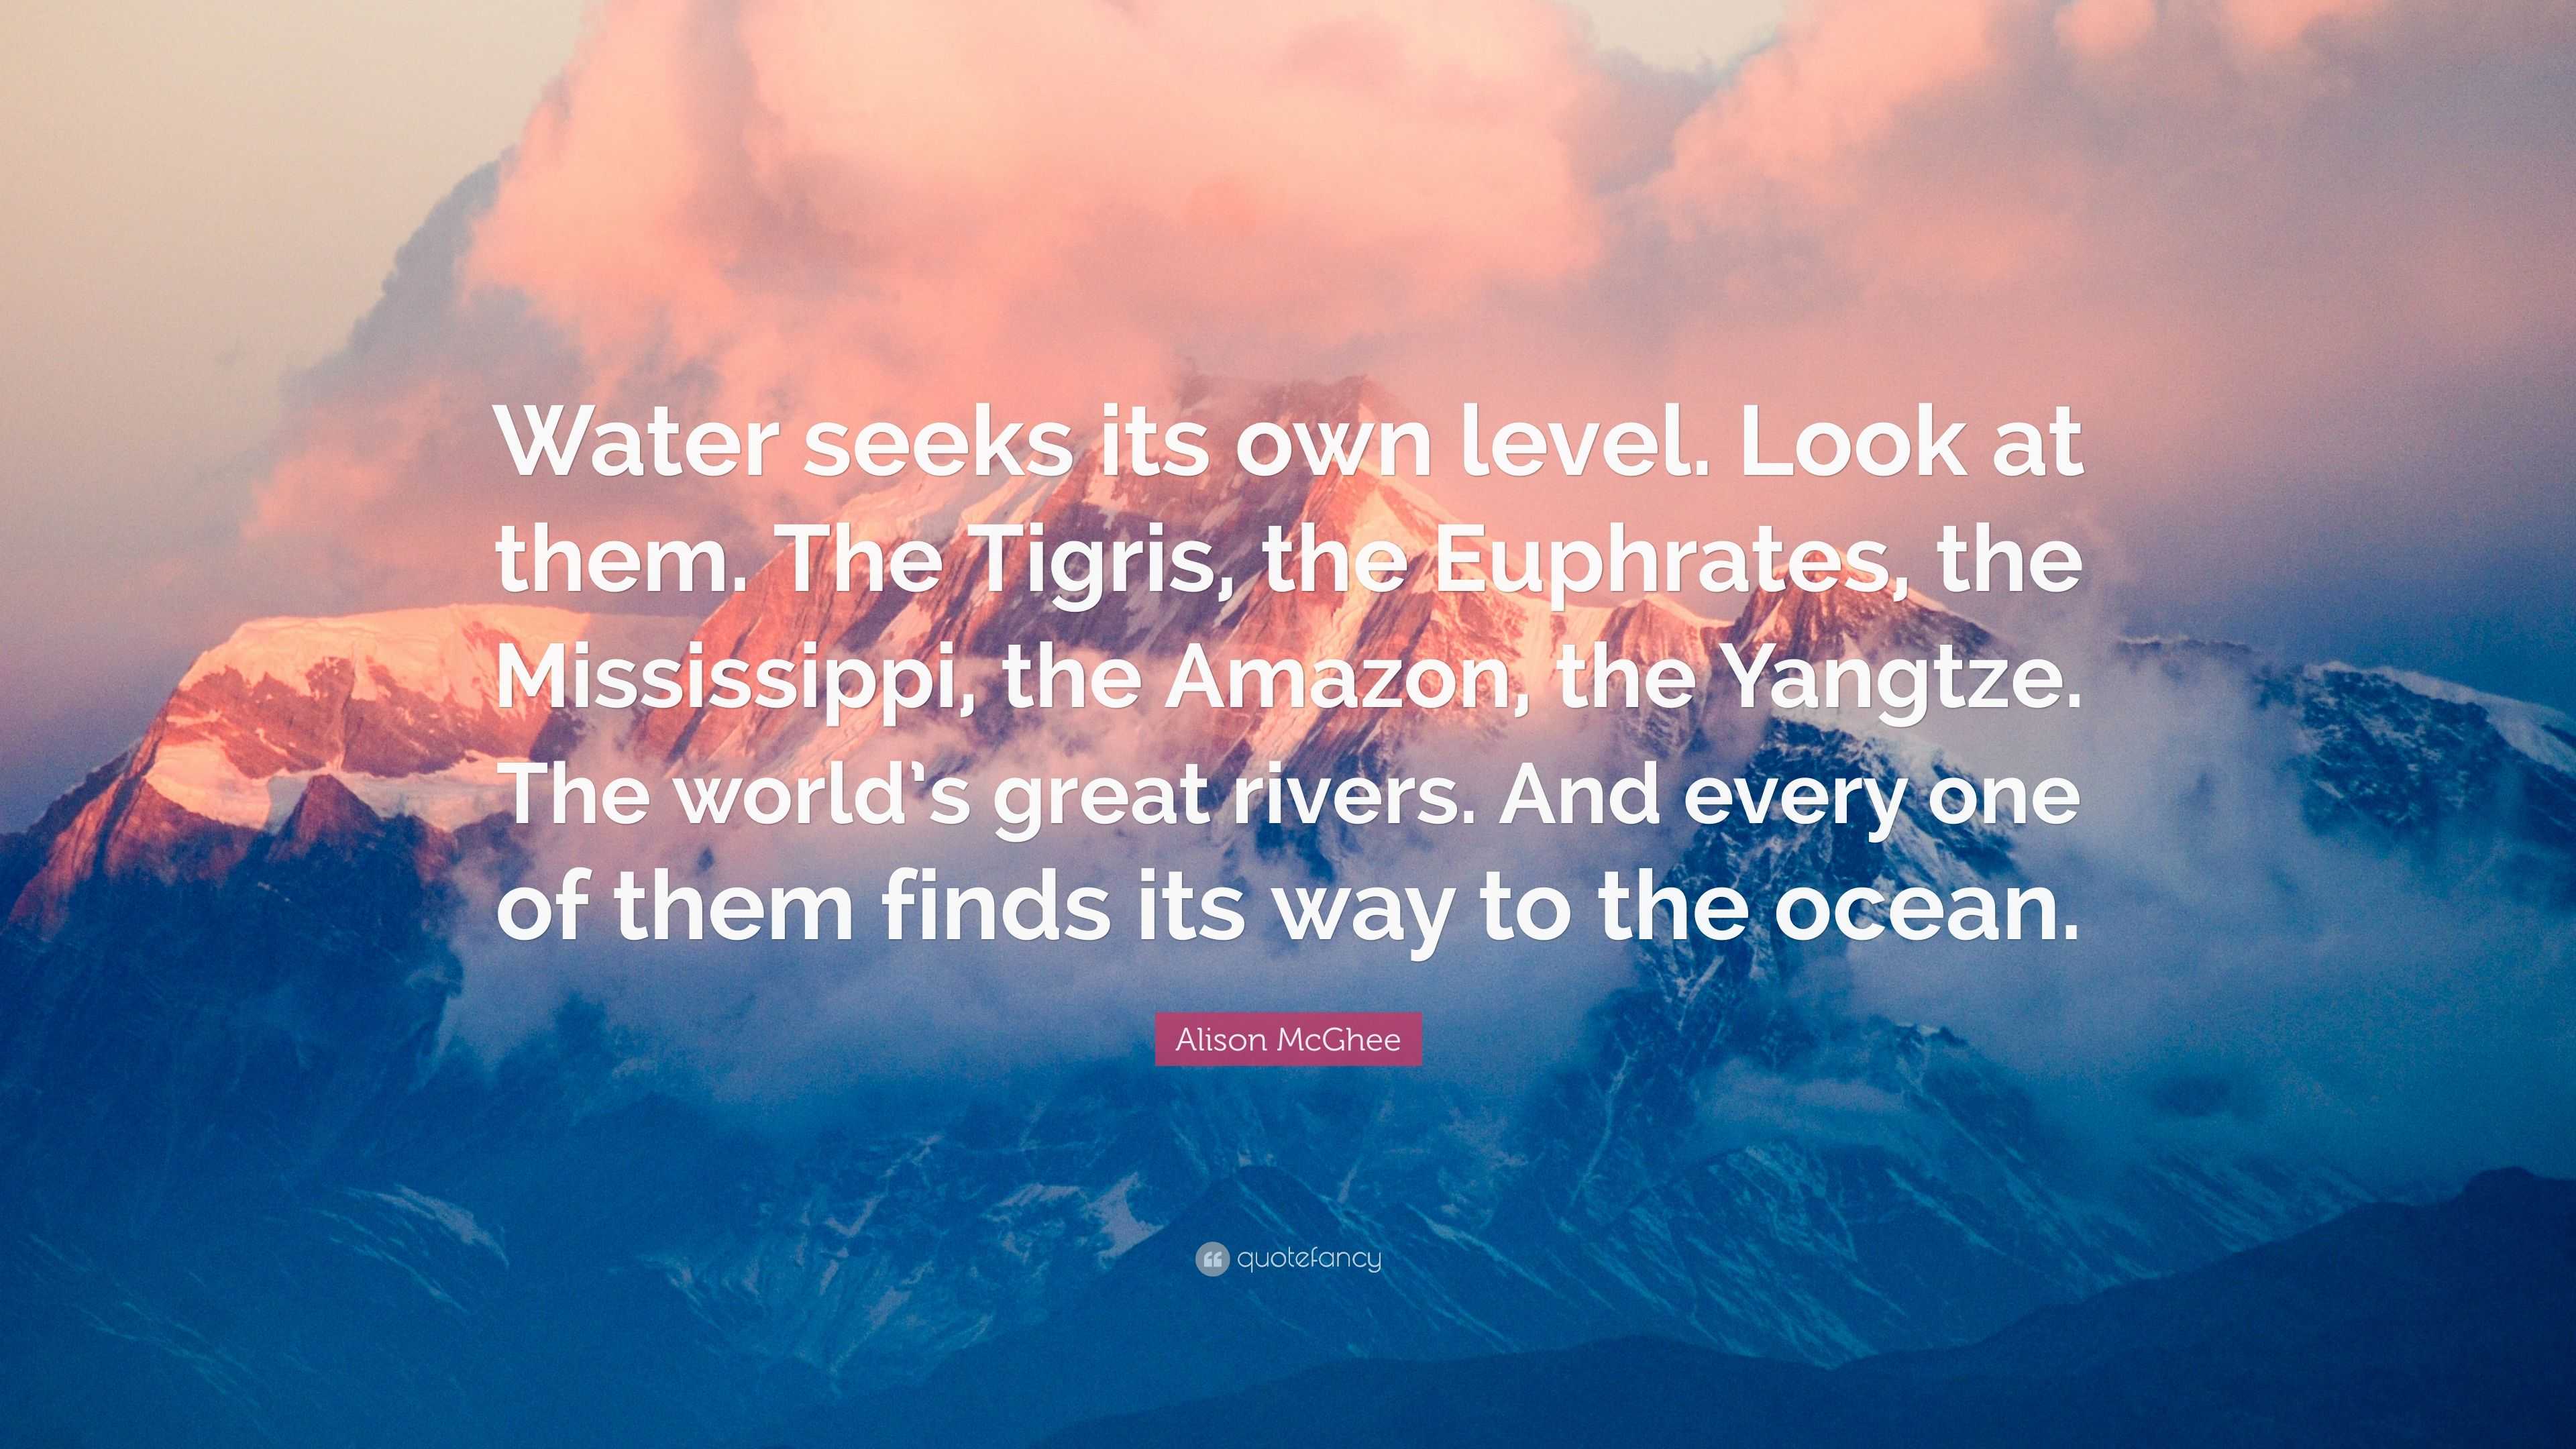 Alison McGhee Quote: "Water seeks its own level. Look at them. The Tigris, the Euphrates, the ...